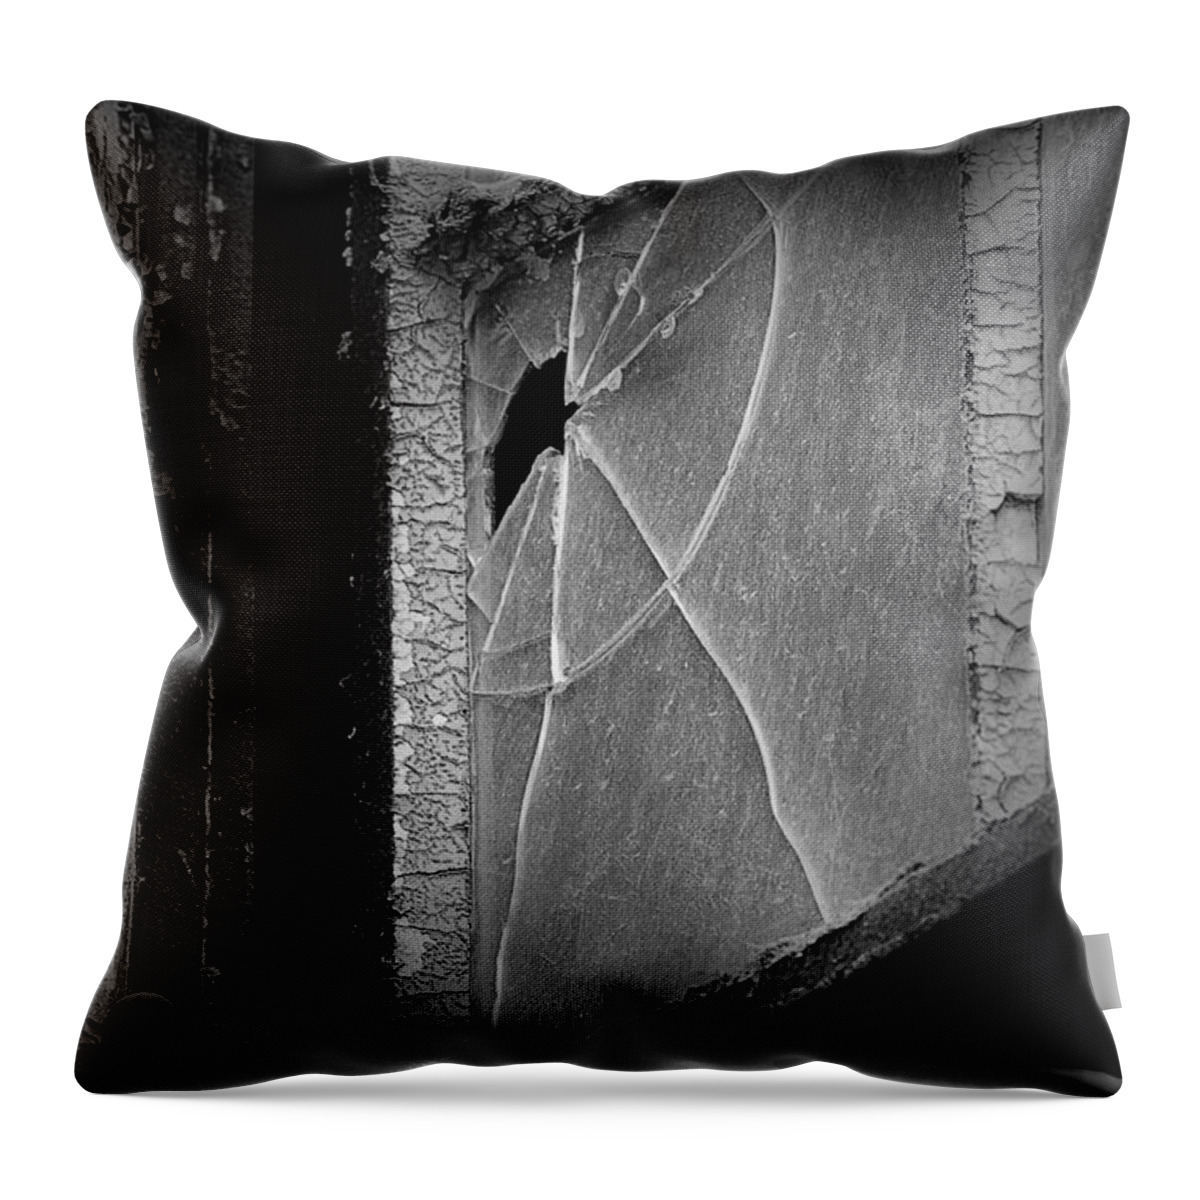 Architecture Throw Pillow featuring the photograph Broken By Denise Dube by Denise Dube